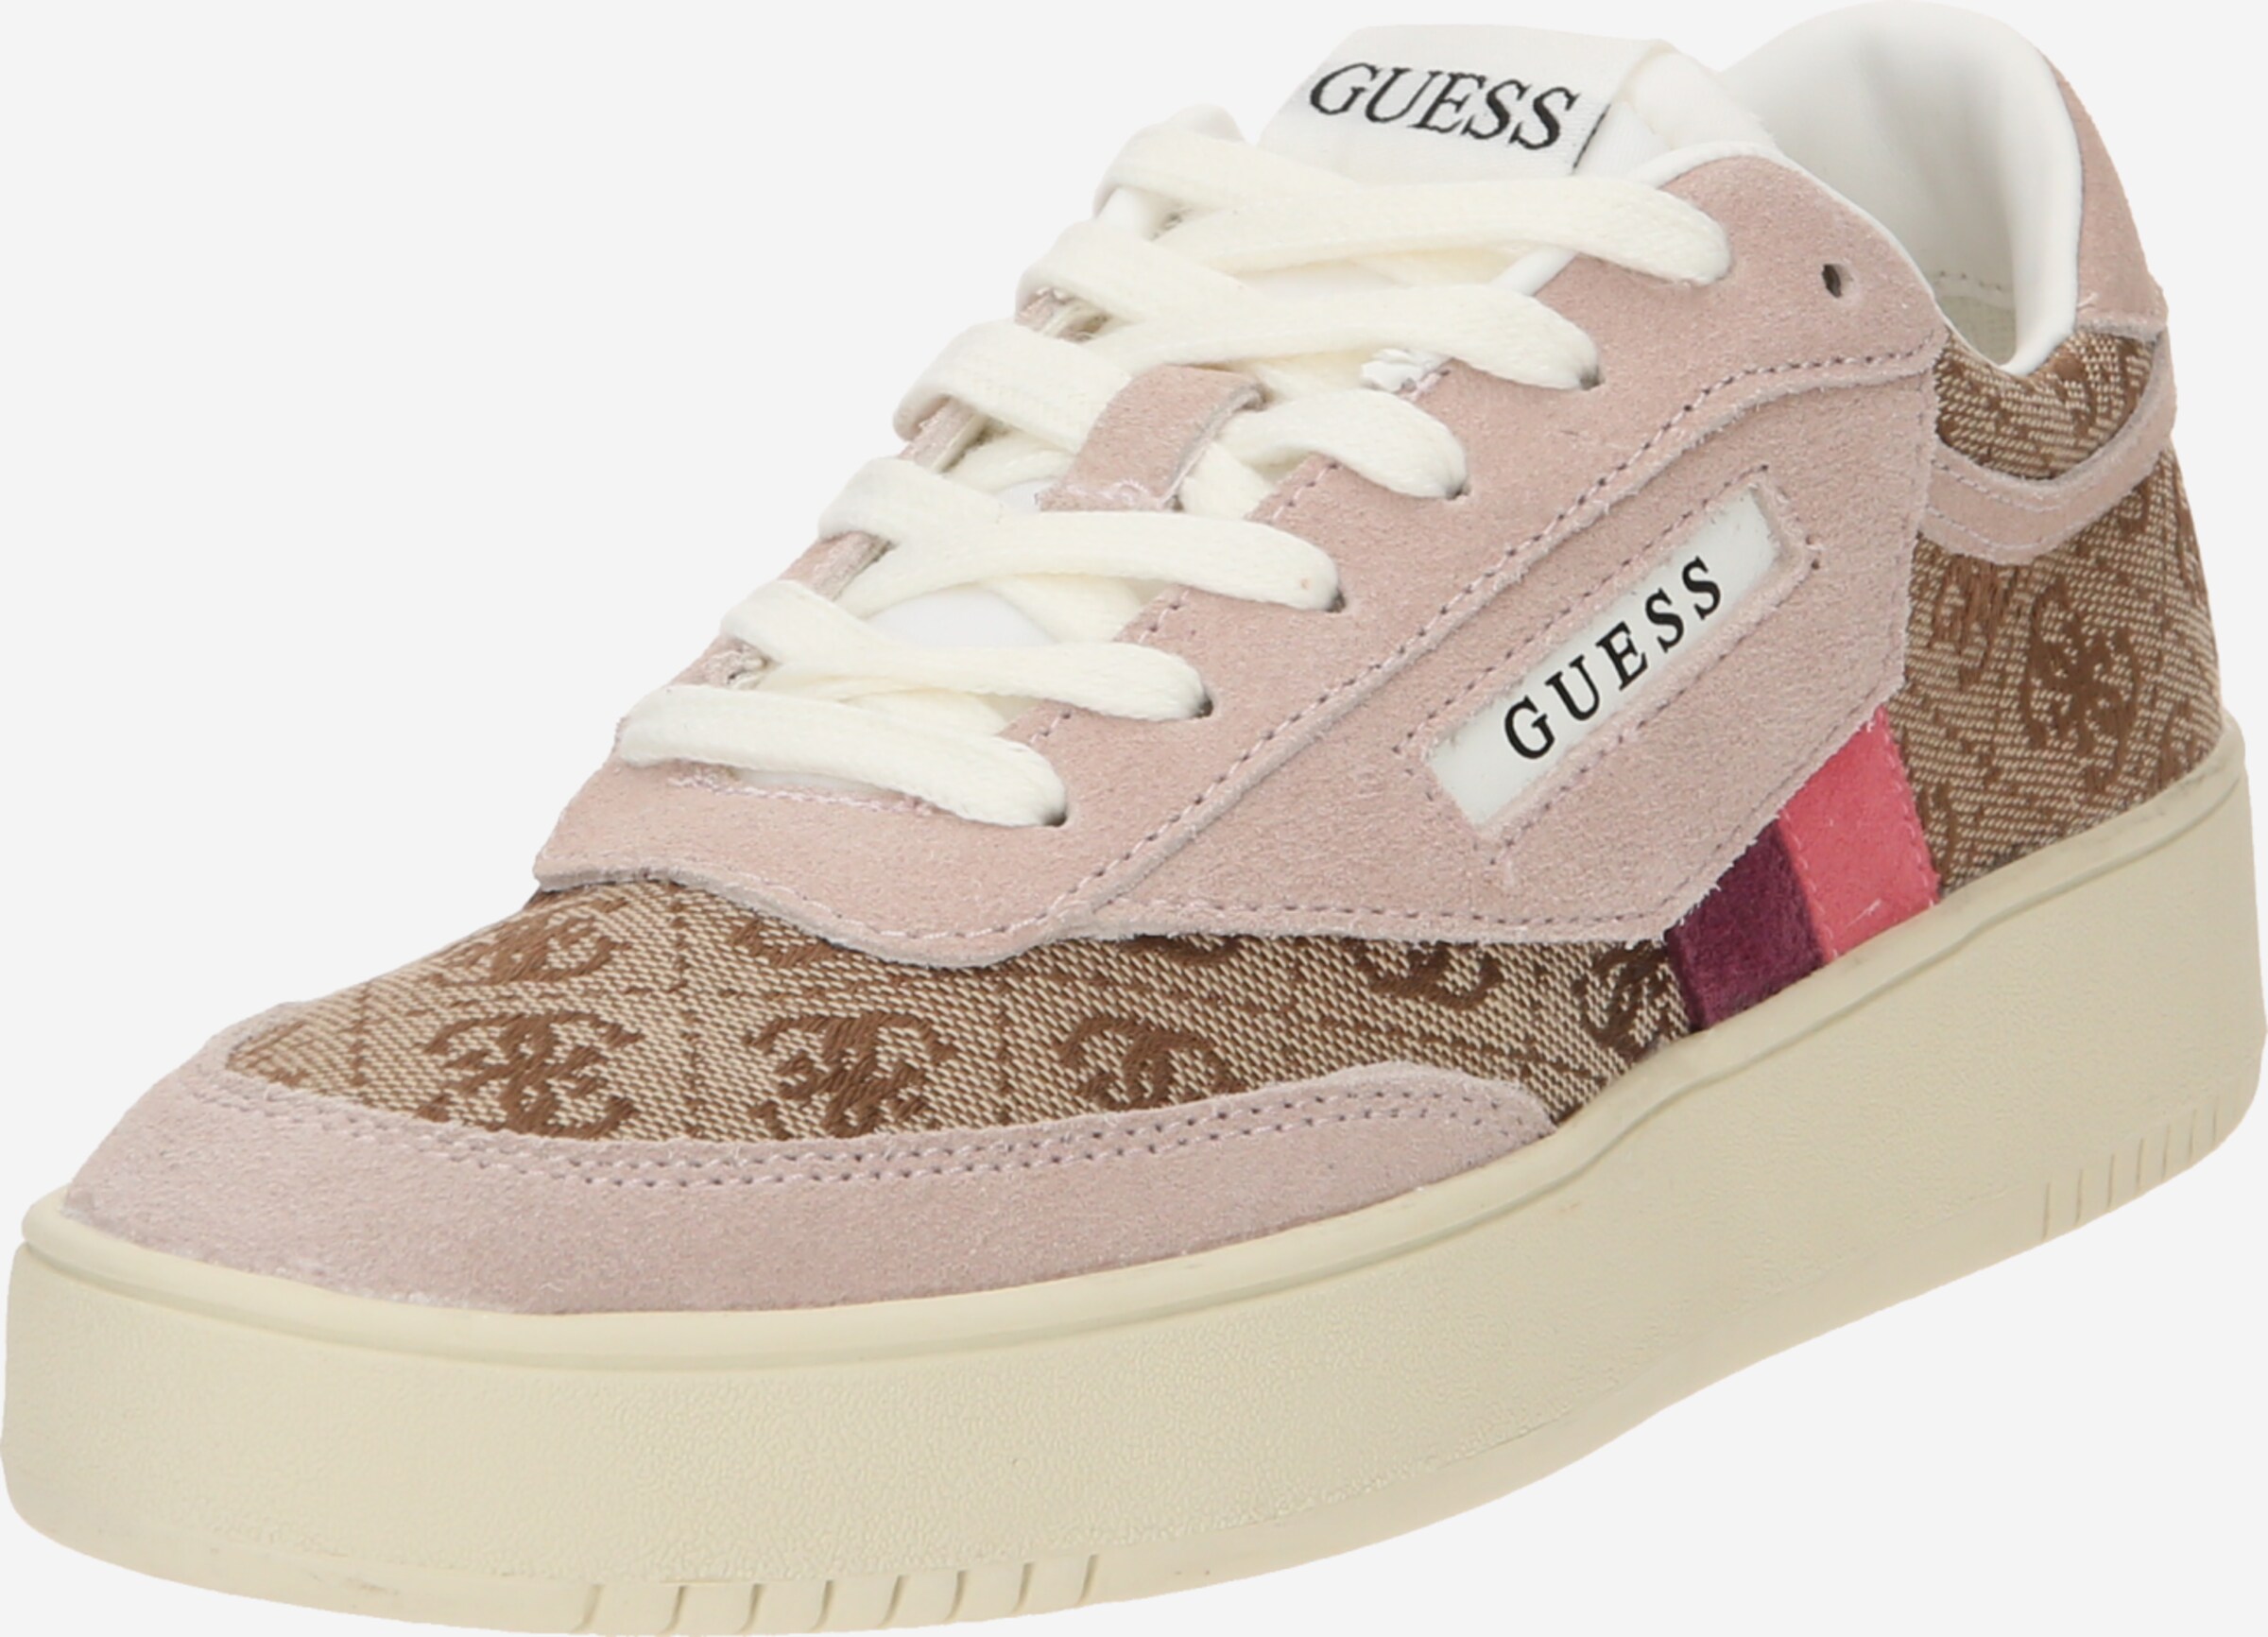 GUESS SNEAKERS BRAYZA VELOURS Baskets Basses Rose - Baskets Femme Guess